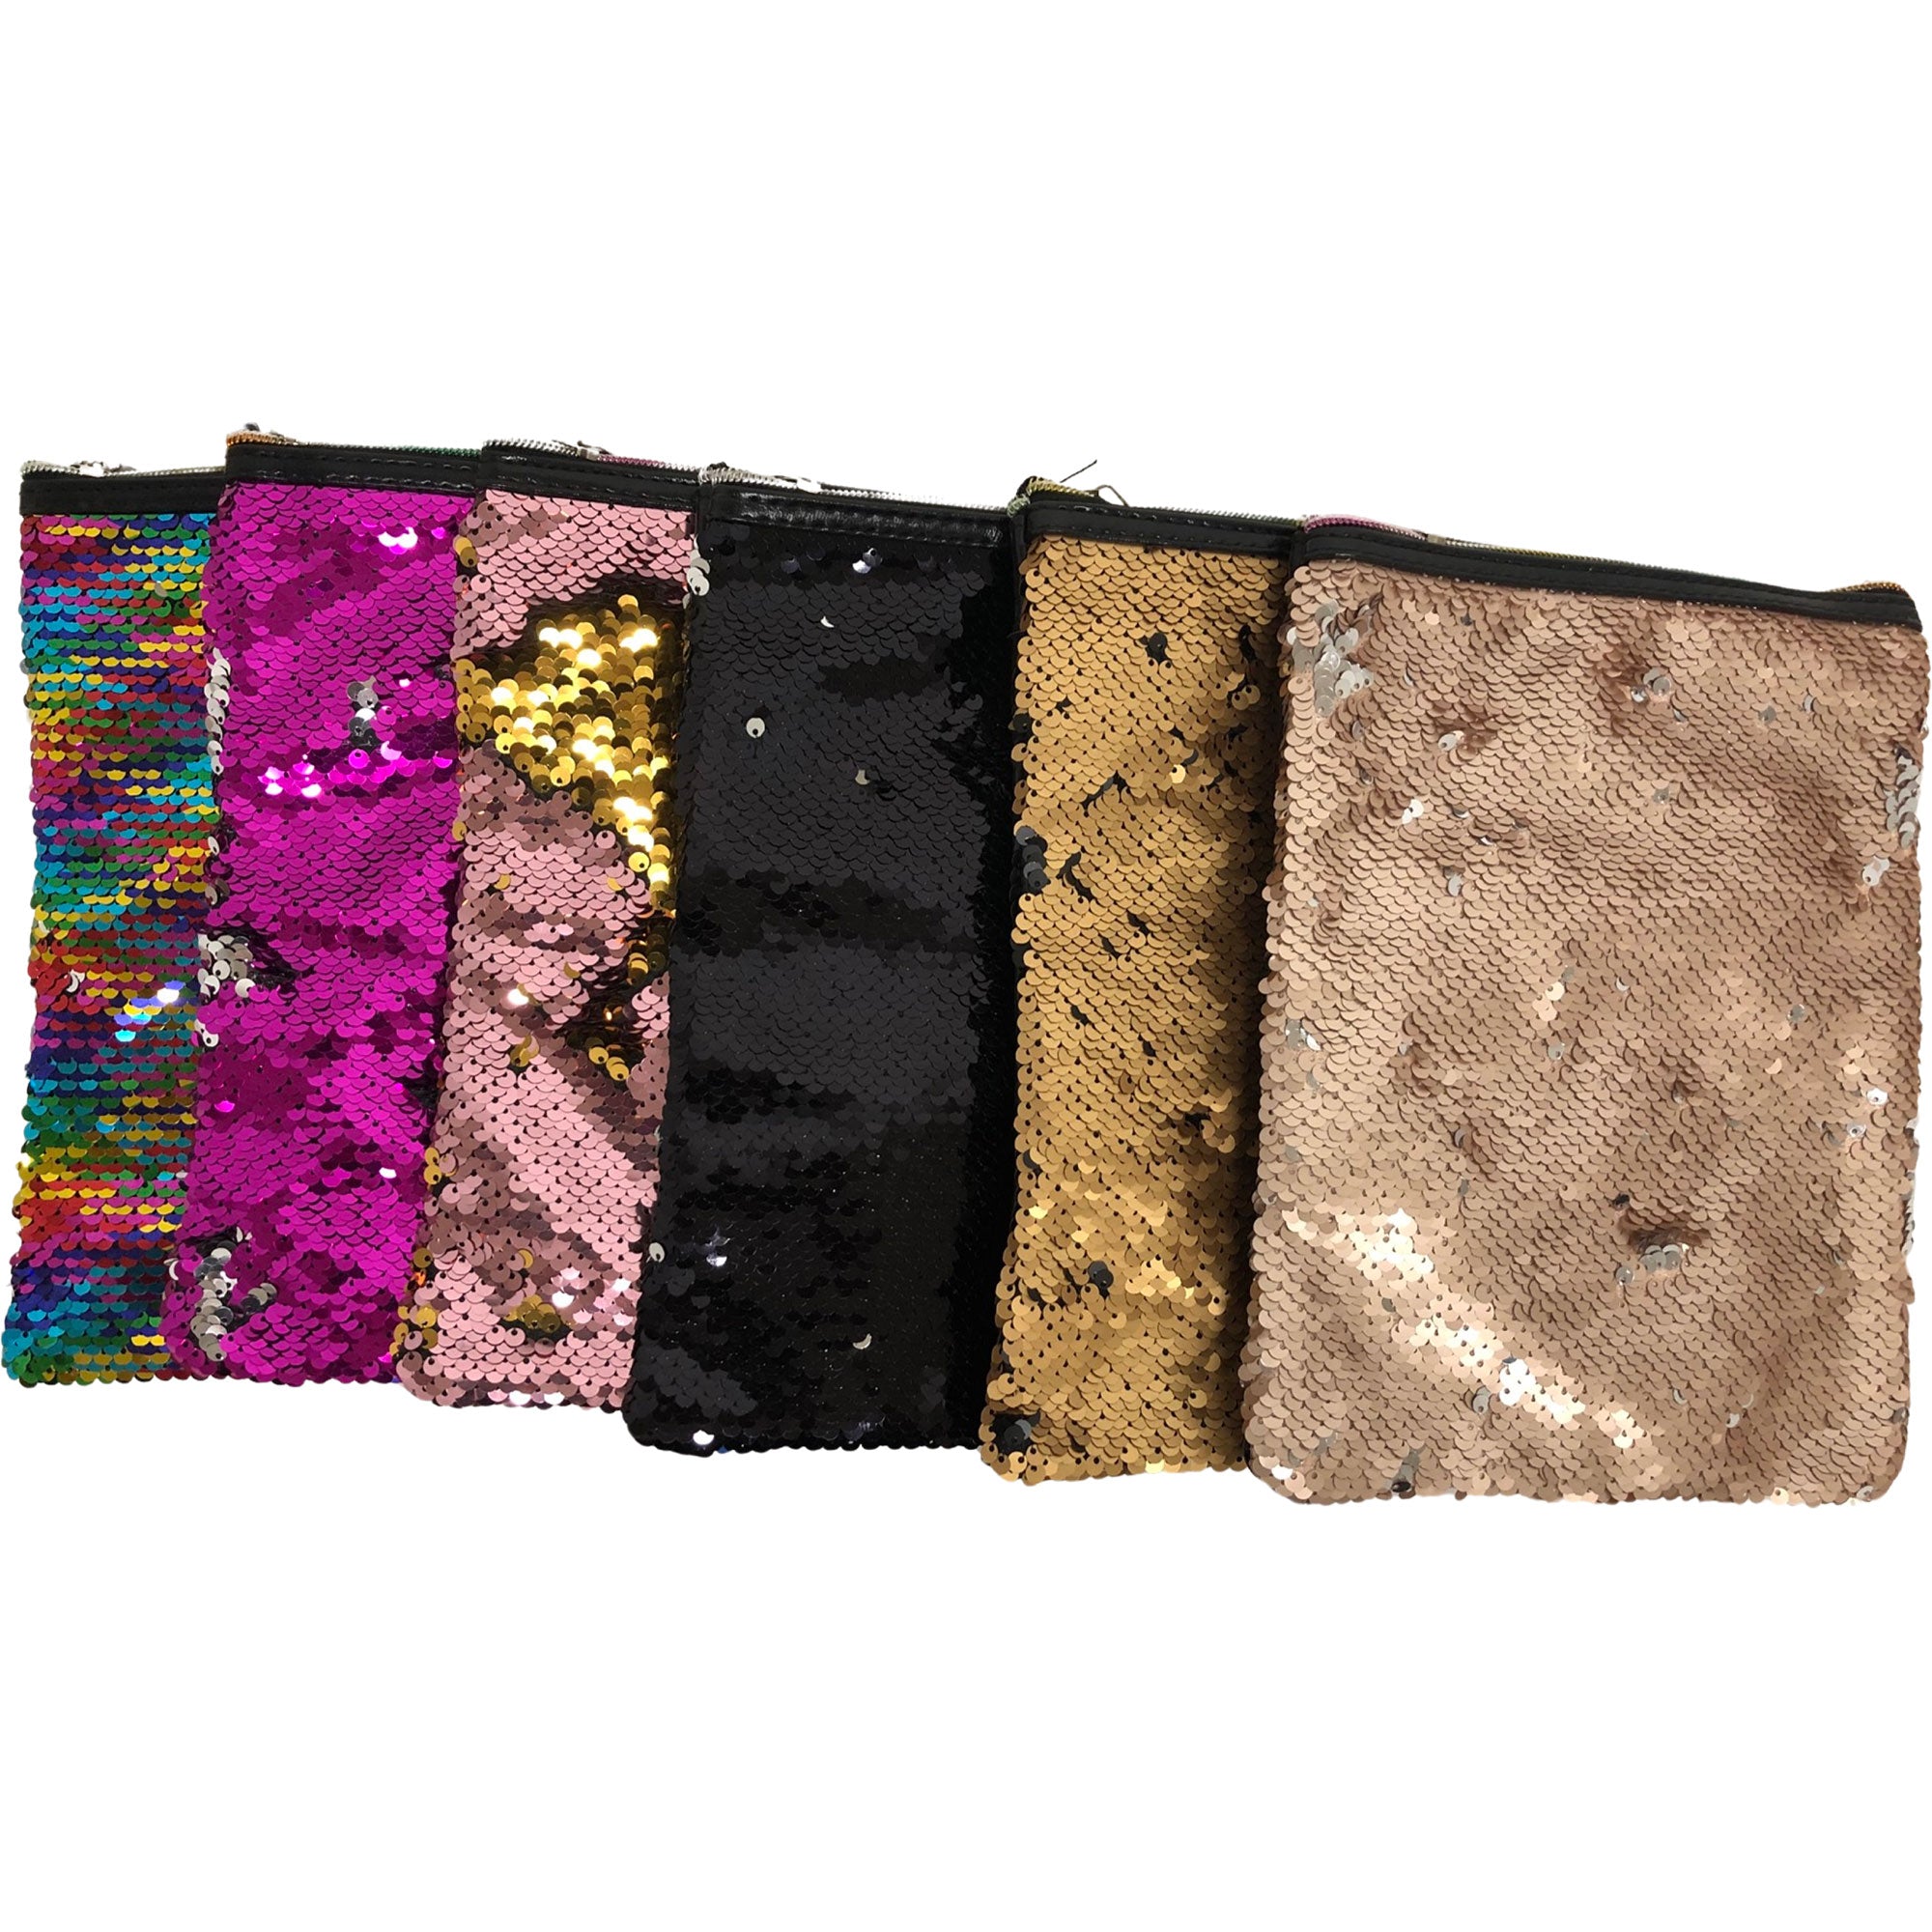 CLEARANCE BRUSH SEQUIN CROSSBODY BAG (CASE OF 60 - $1.00 / PIECE)  Wholesale Sequin Crossbody in Assorted Colors SKU: 313-SEQ-60